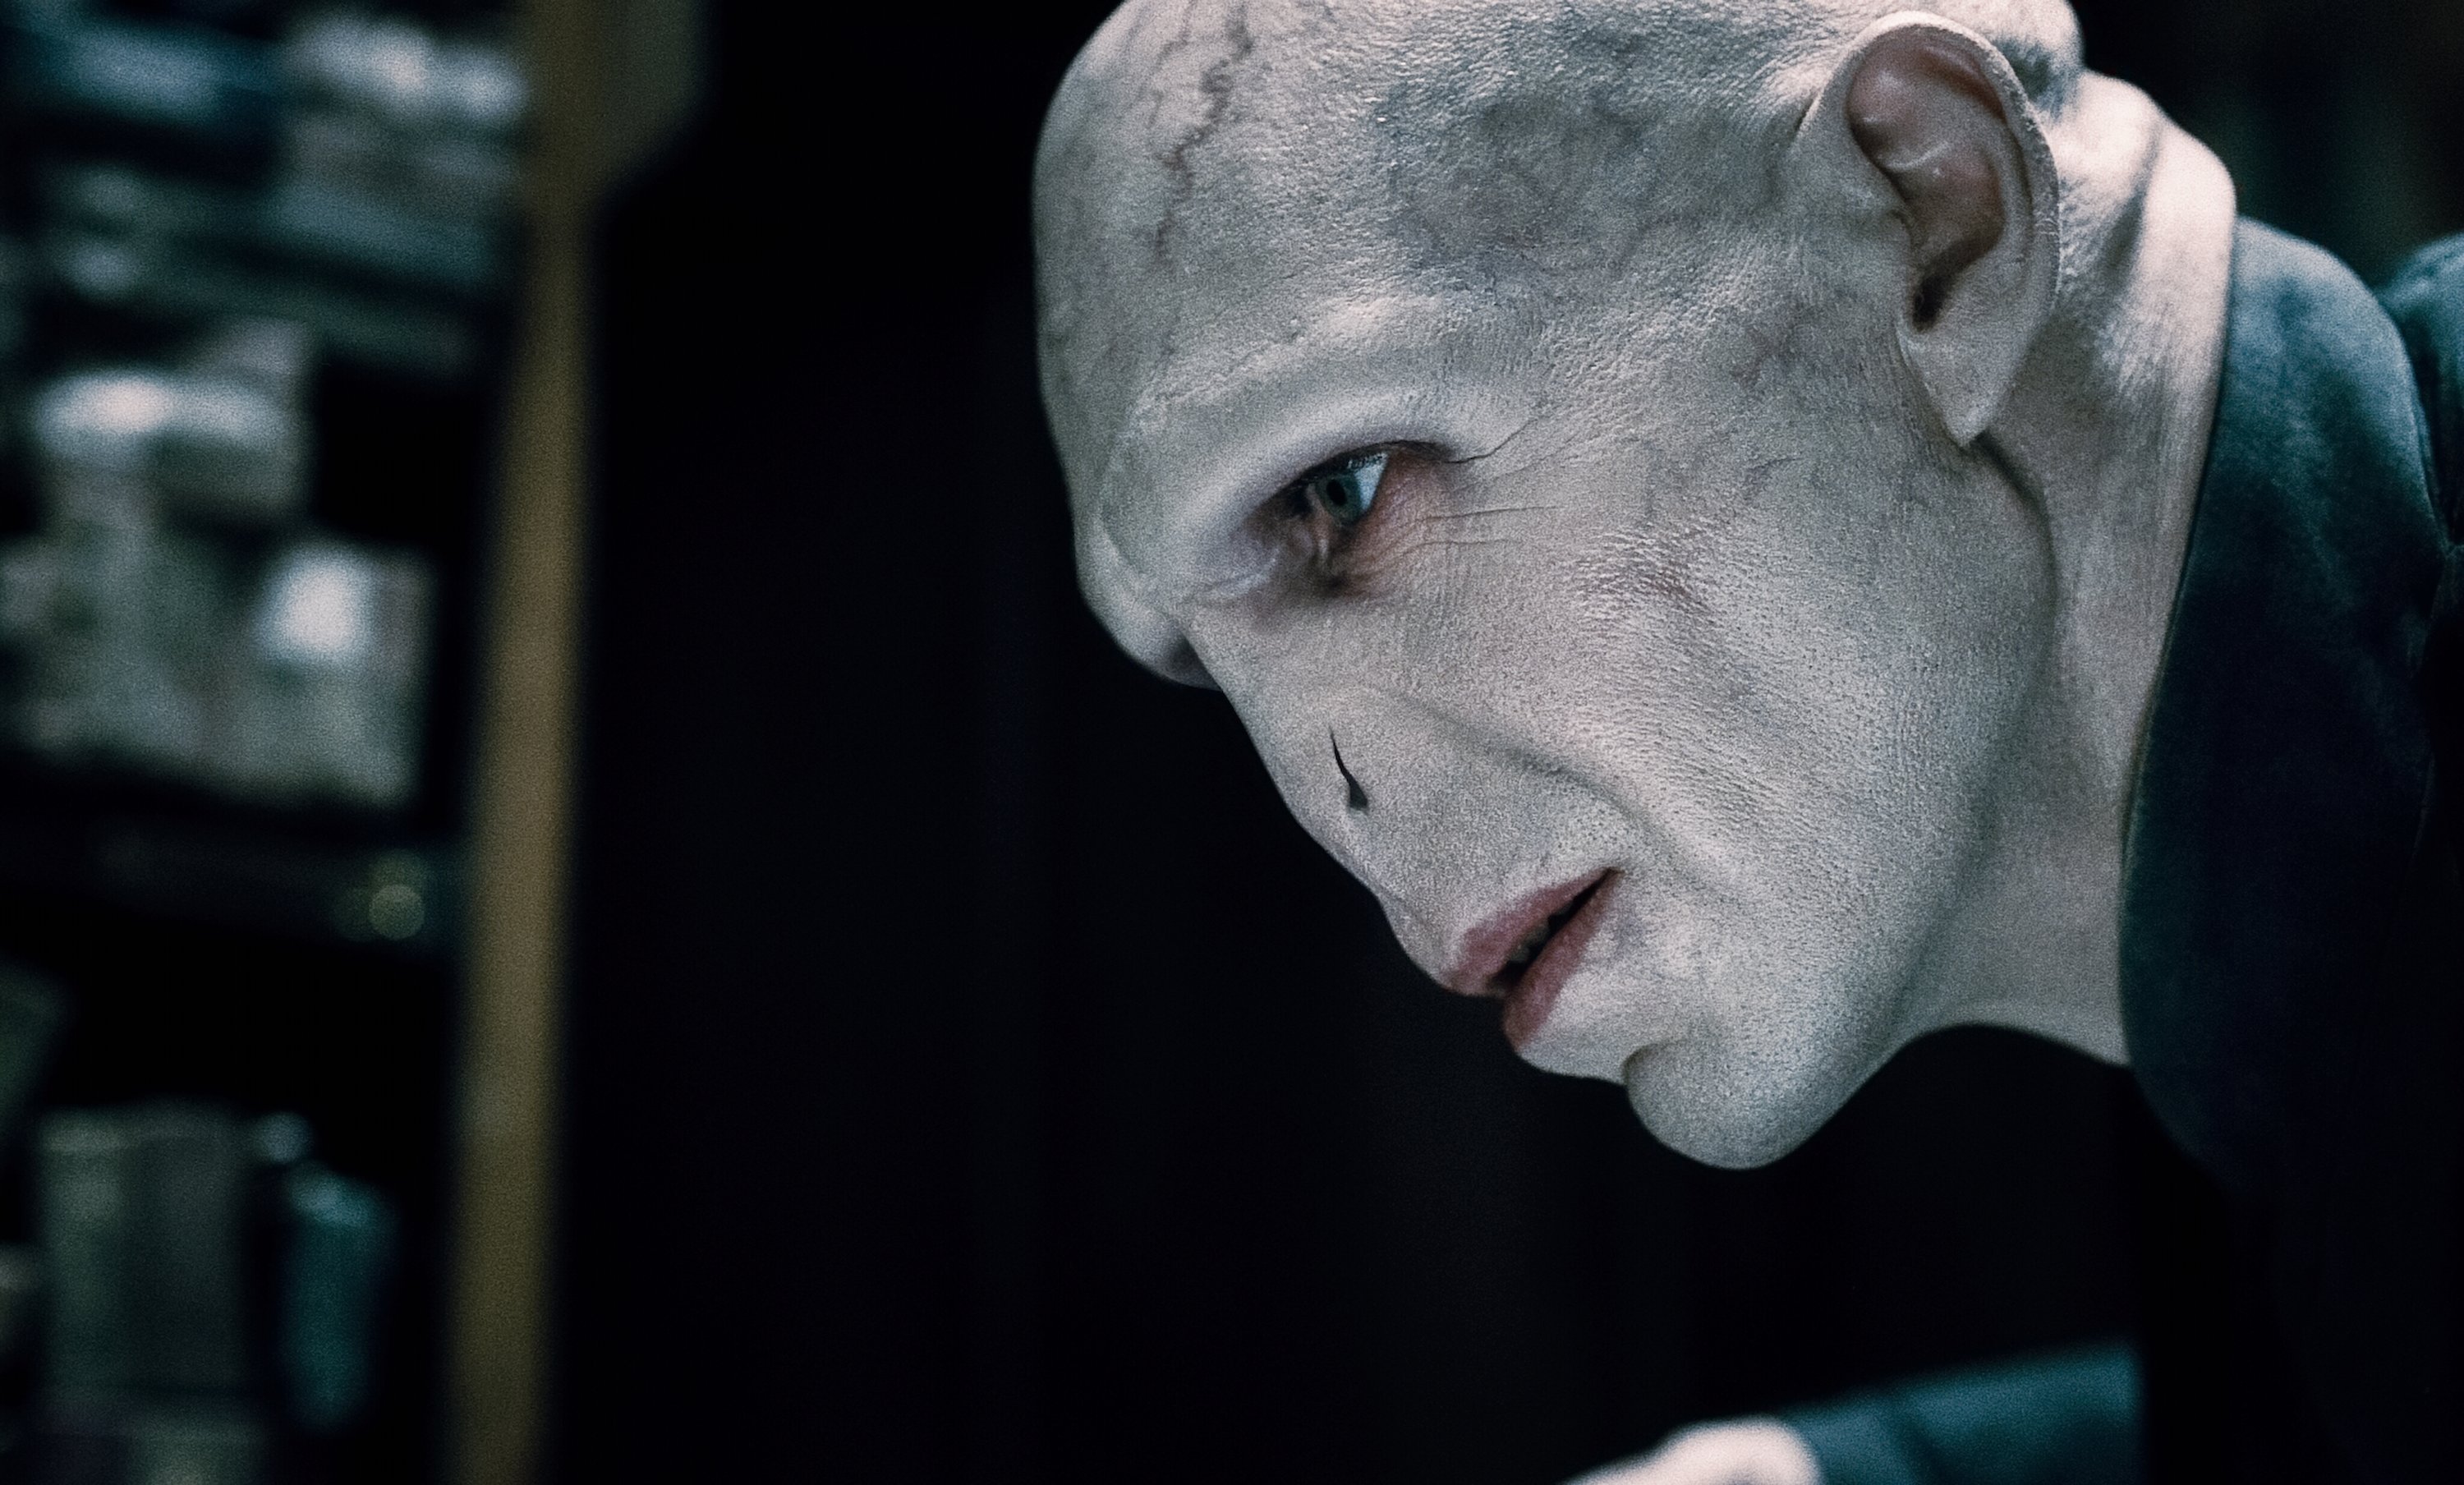 harry potter, movie, harry potter and the deathly hallows: part 1, lord voldemort